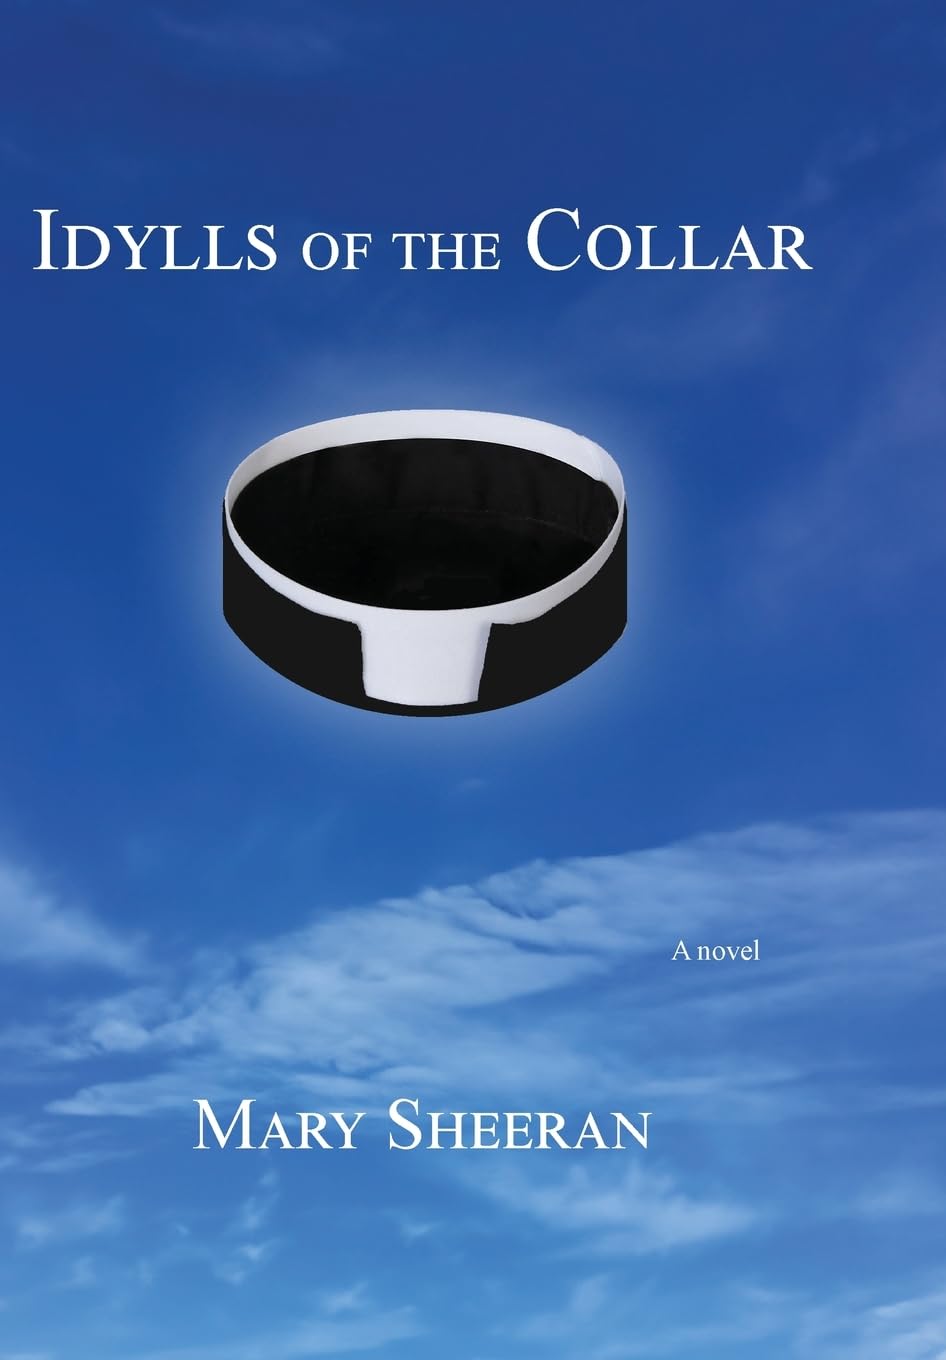 Discover the Powerful Journey of Faith and Friendship in Idylls of the Collar by Mary Sheeran